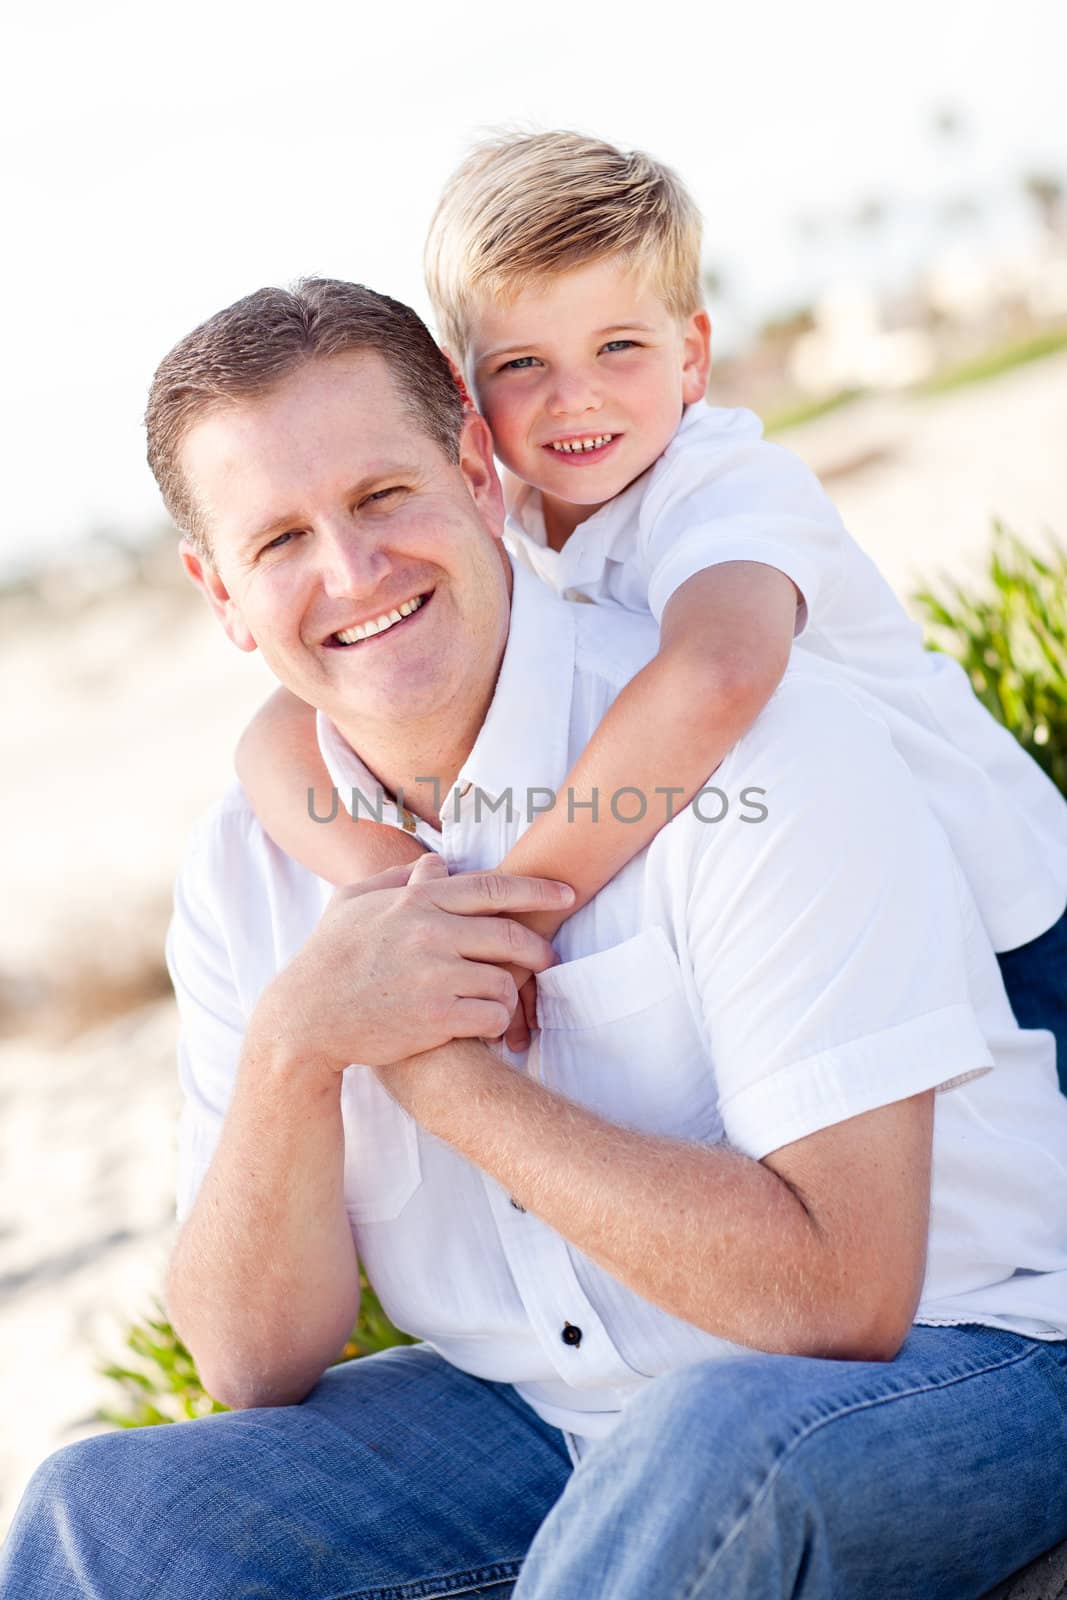 Cute Son with His Handsome Dad Portrait at the Beach